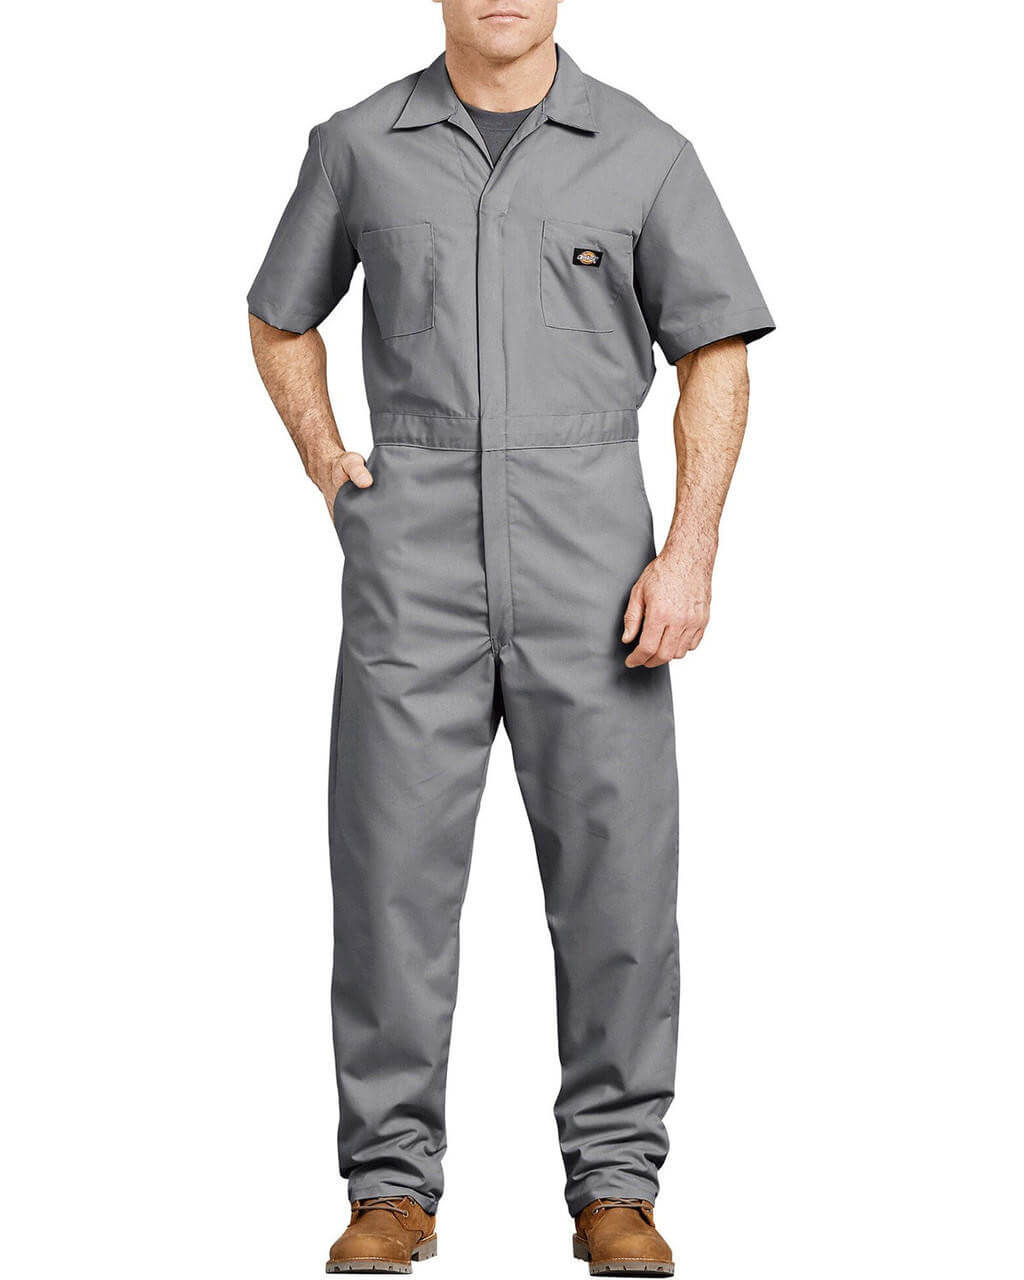 How to Measure for Men's Coveralls?